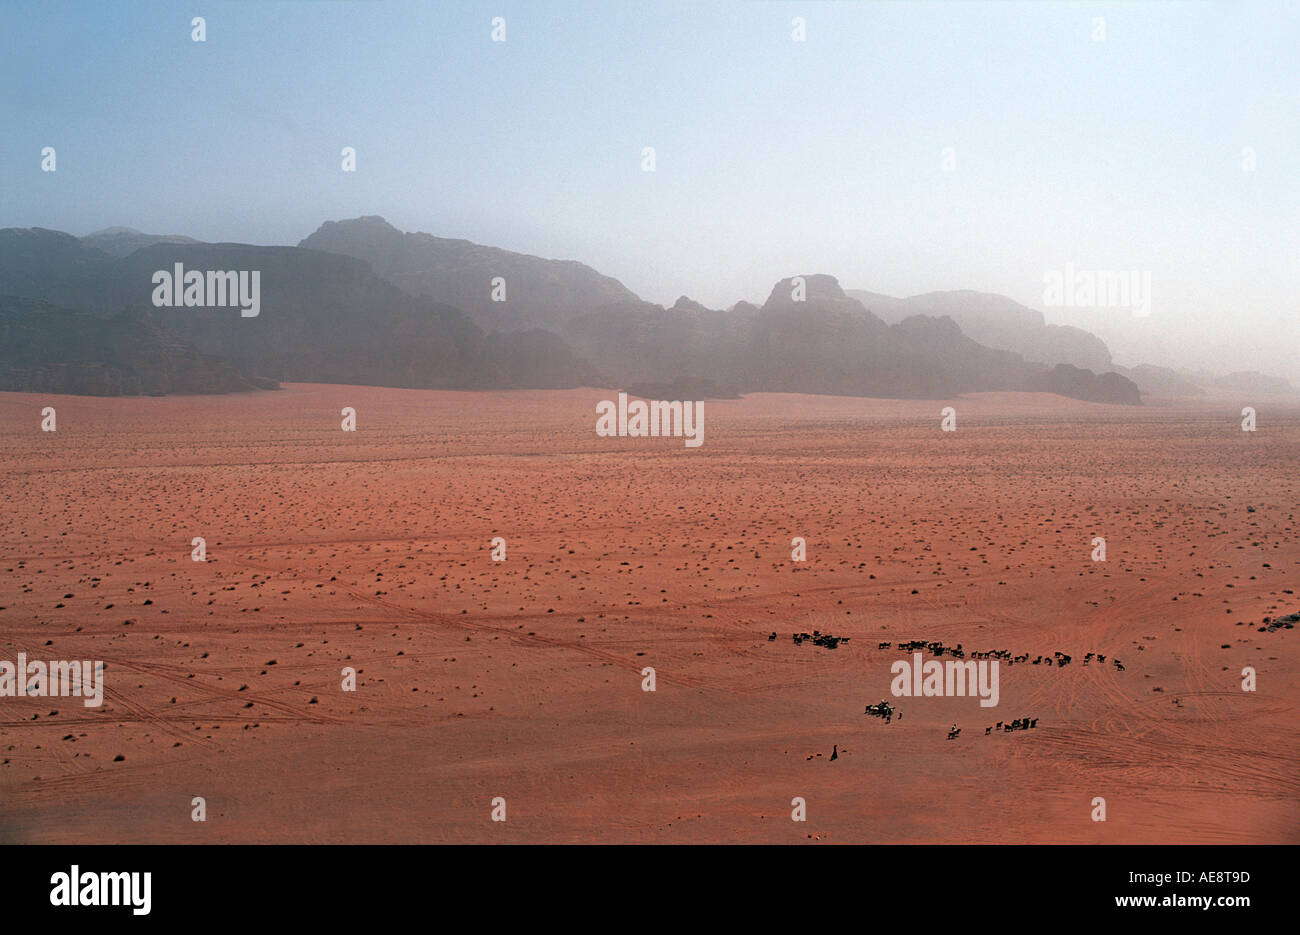 Red sand floor of the desert with rocky outcrops called Jebels in the distance Herding goats Wadi Rum Jordan Stock Photo